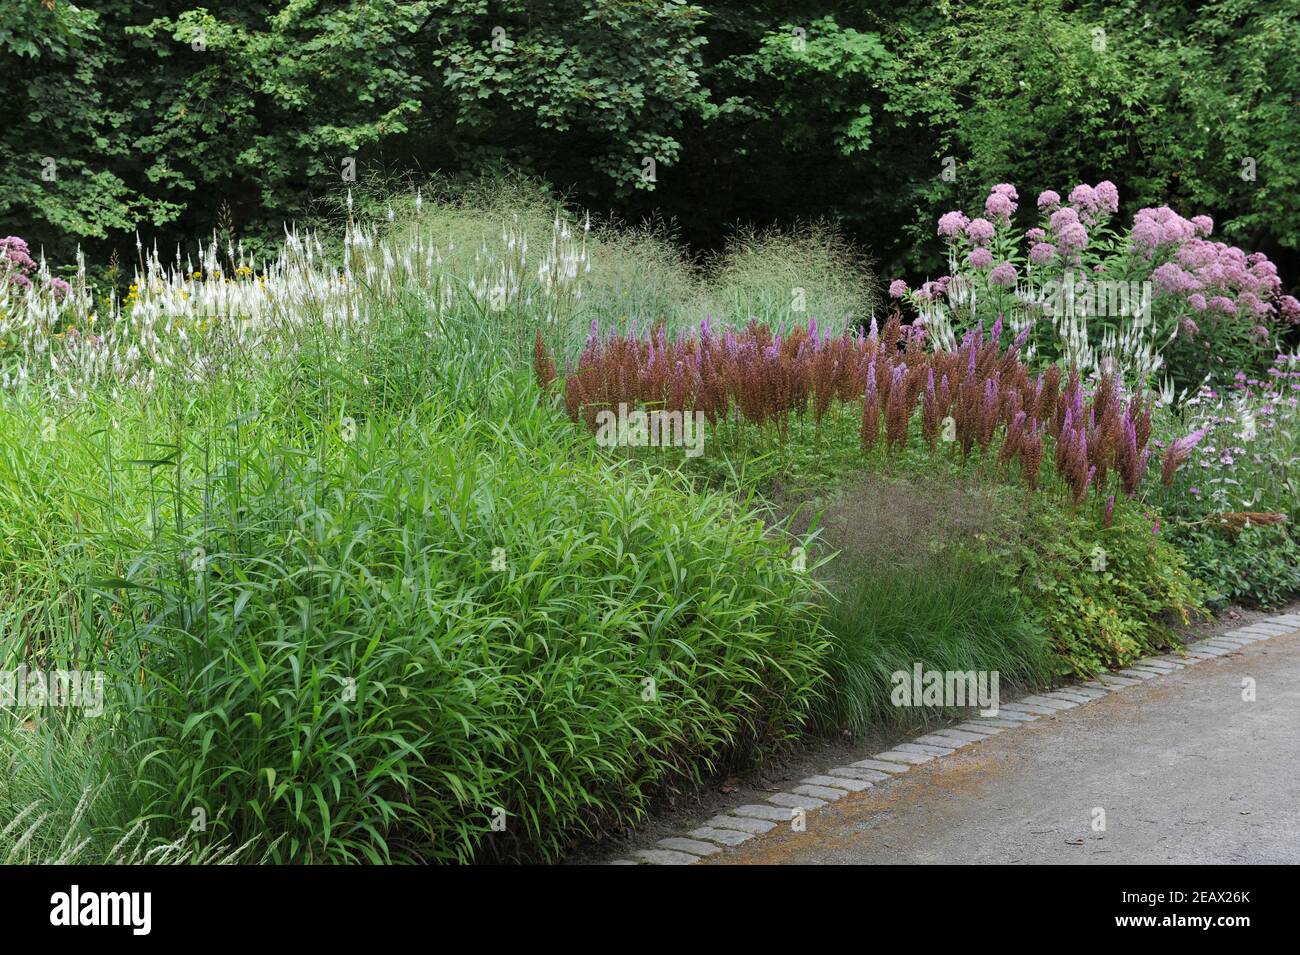 HAMM, GERMANY - 15 AUGUST 2015: Planting in perennial meadow style designed by Piet Oudolf in the Nature Designs garden in the Maximilianpark Stock Photo